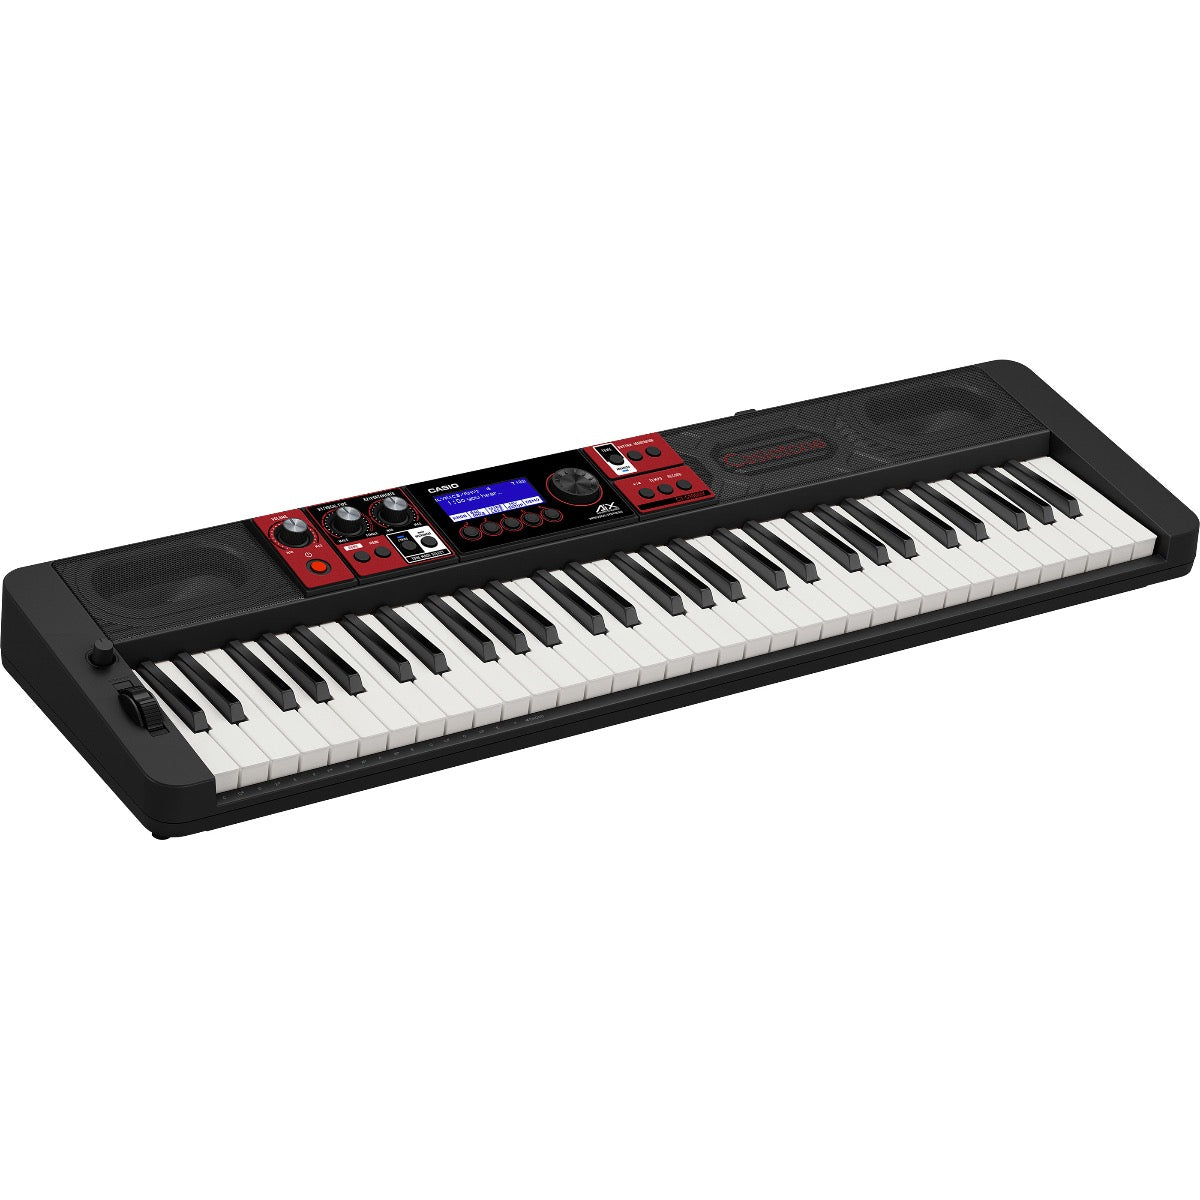 Casio Casiotone CT-S1000V Portable Keyboard View 3